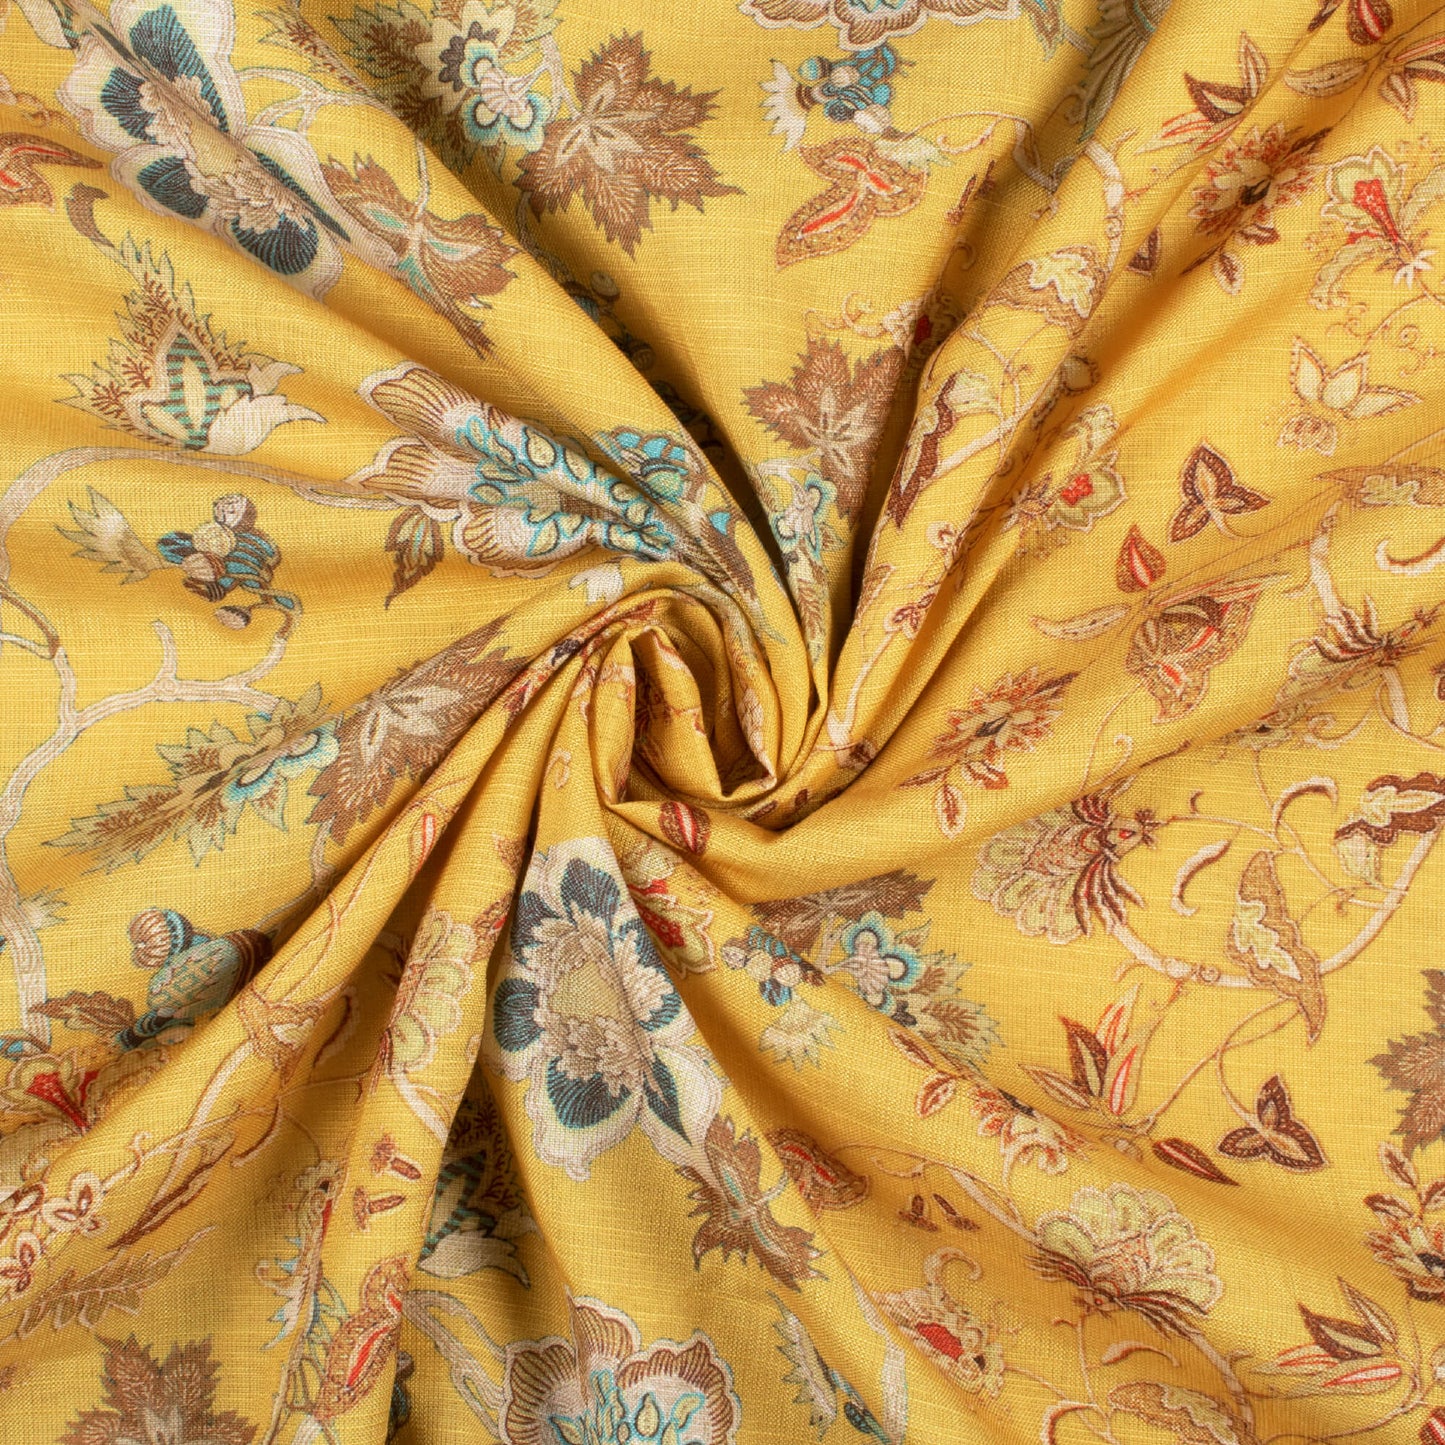 Mustard Yellow And Blue Floral Pattern Digital Print Linen Textured Fabric (Width 50 Inches)